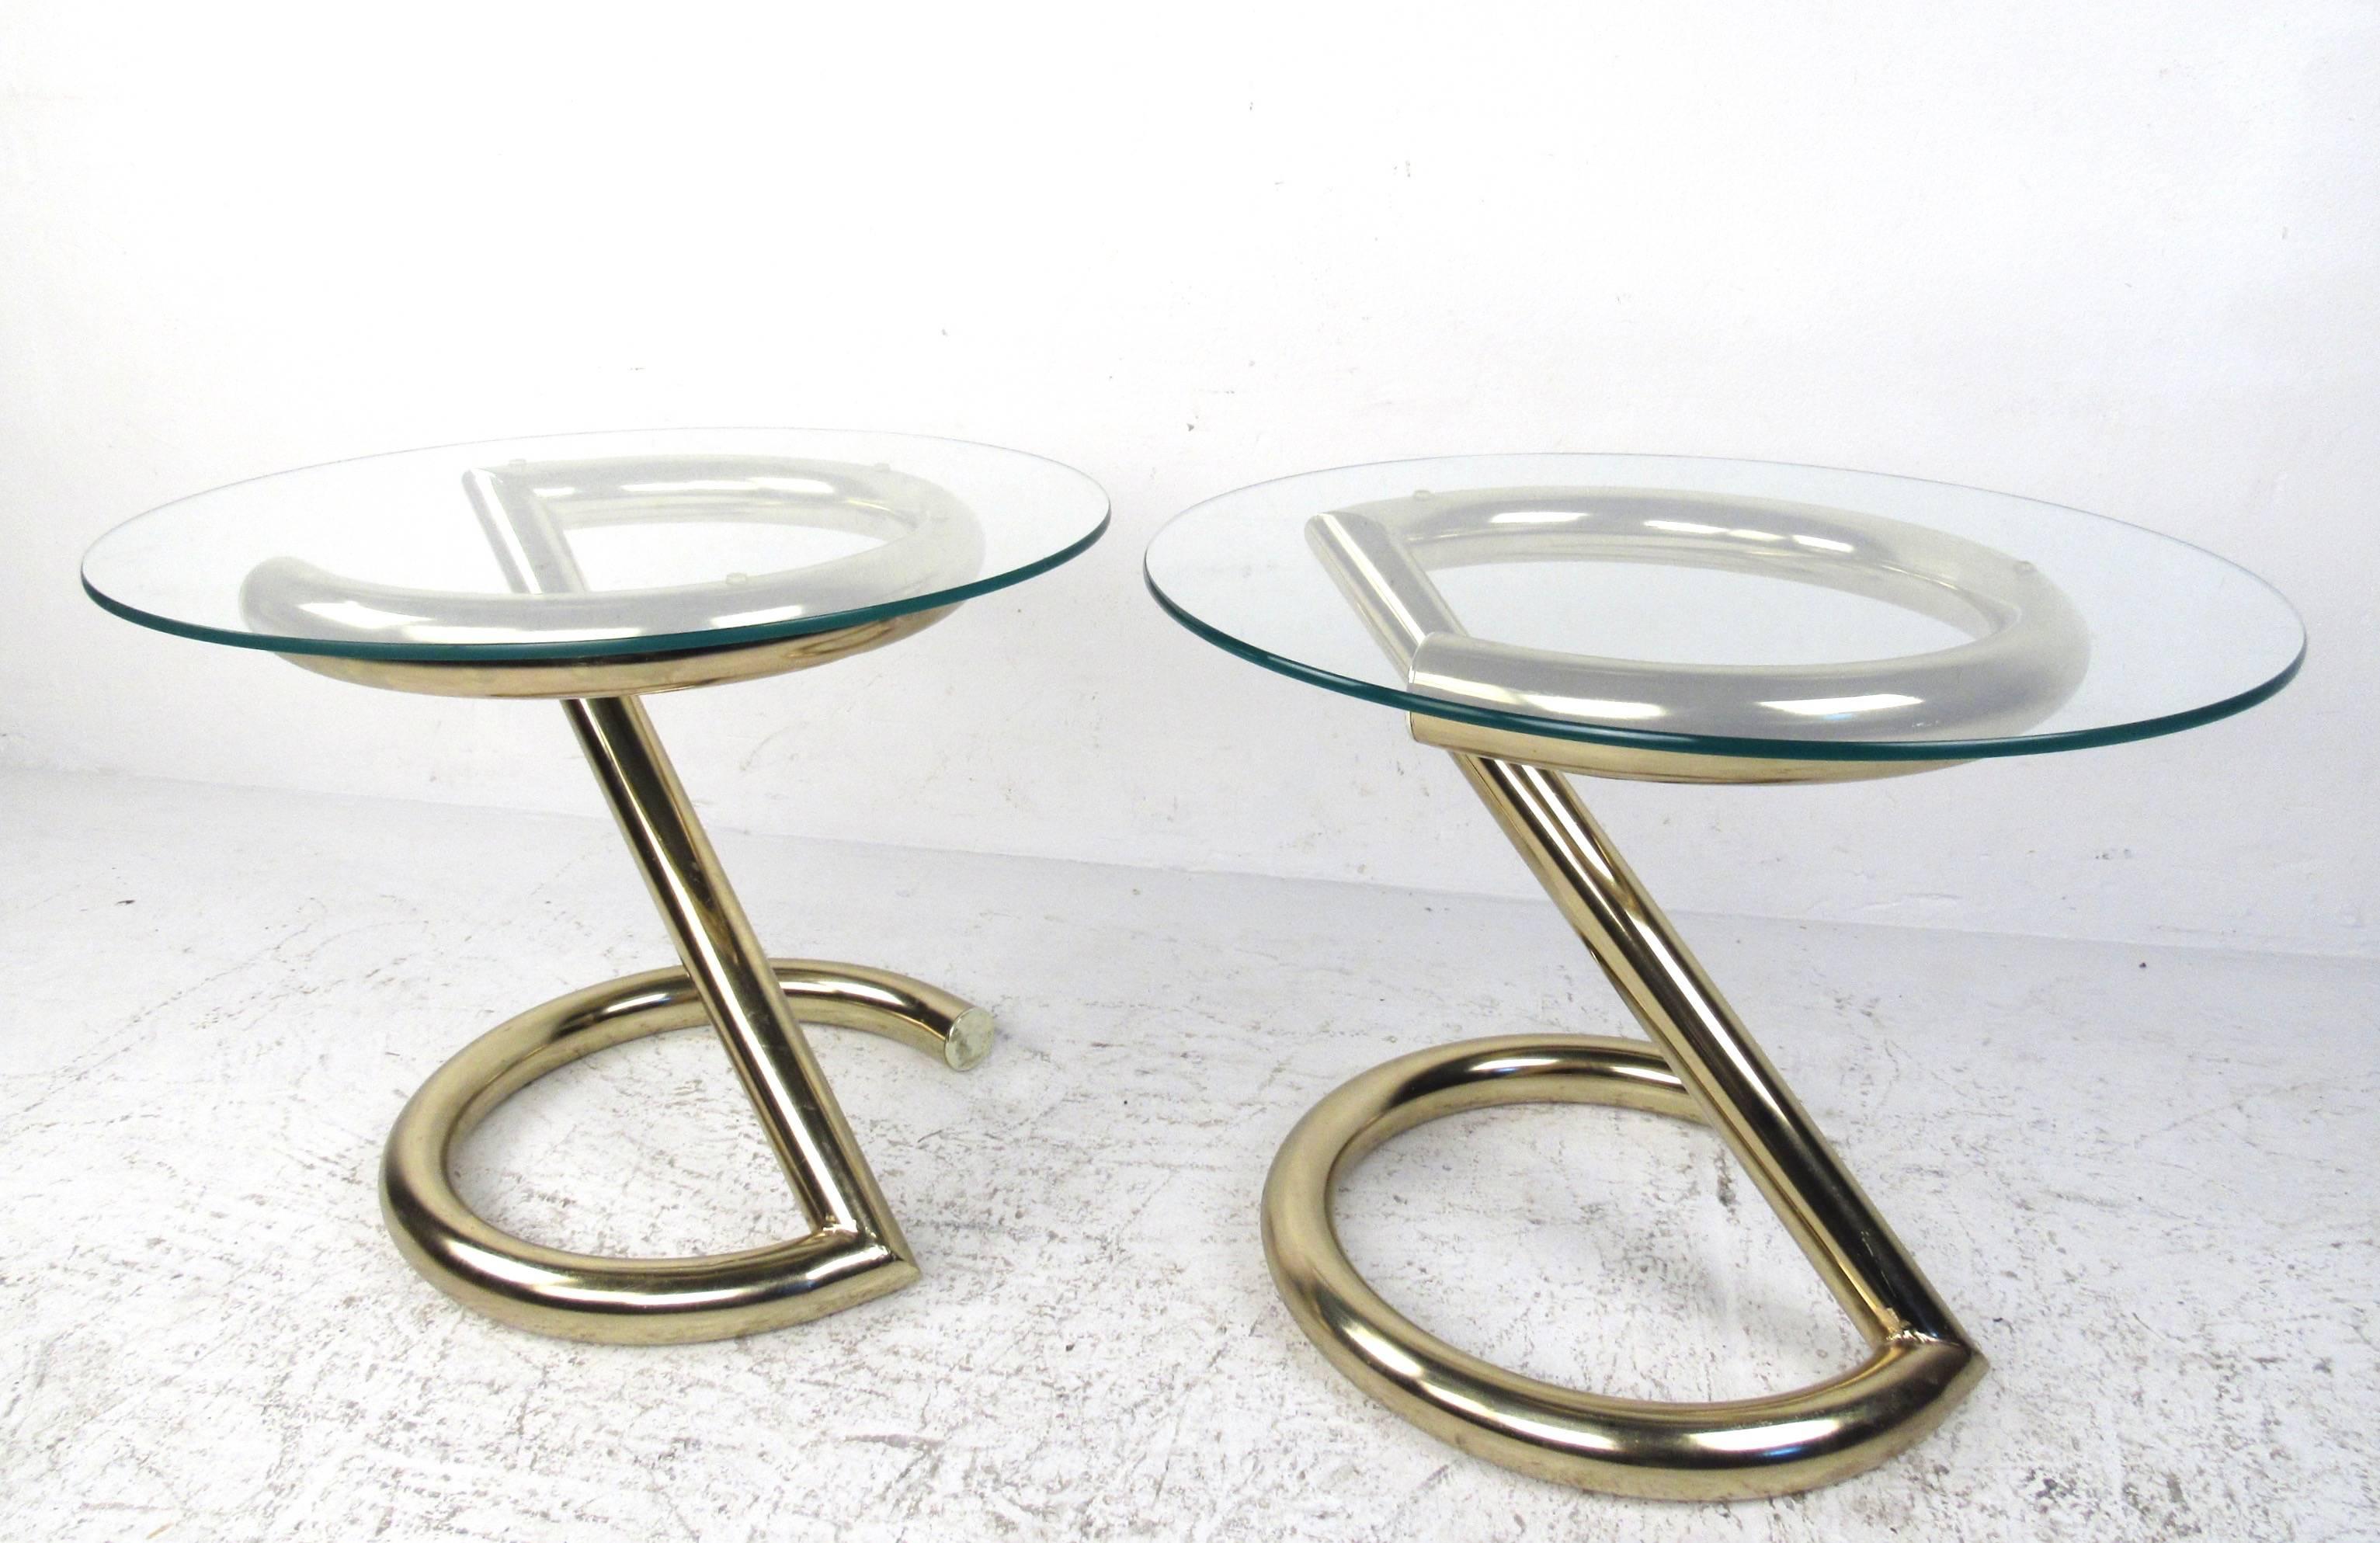 Late 20th Century Pair of Mid-Century Modern Circular Brass and Glass End Tables